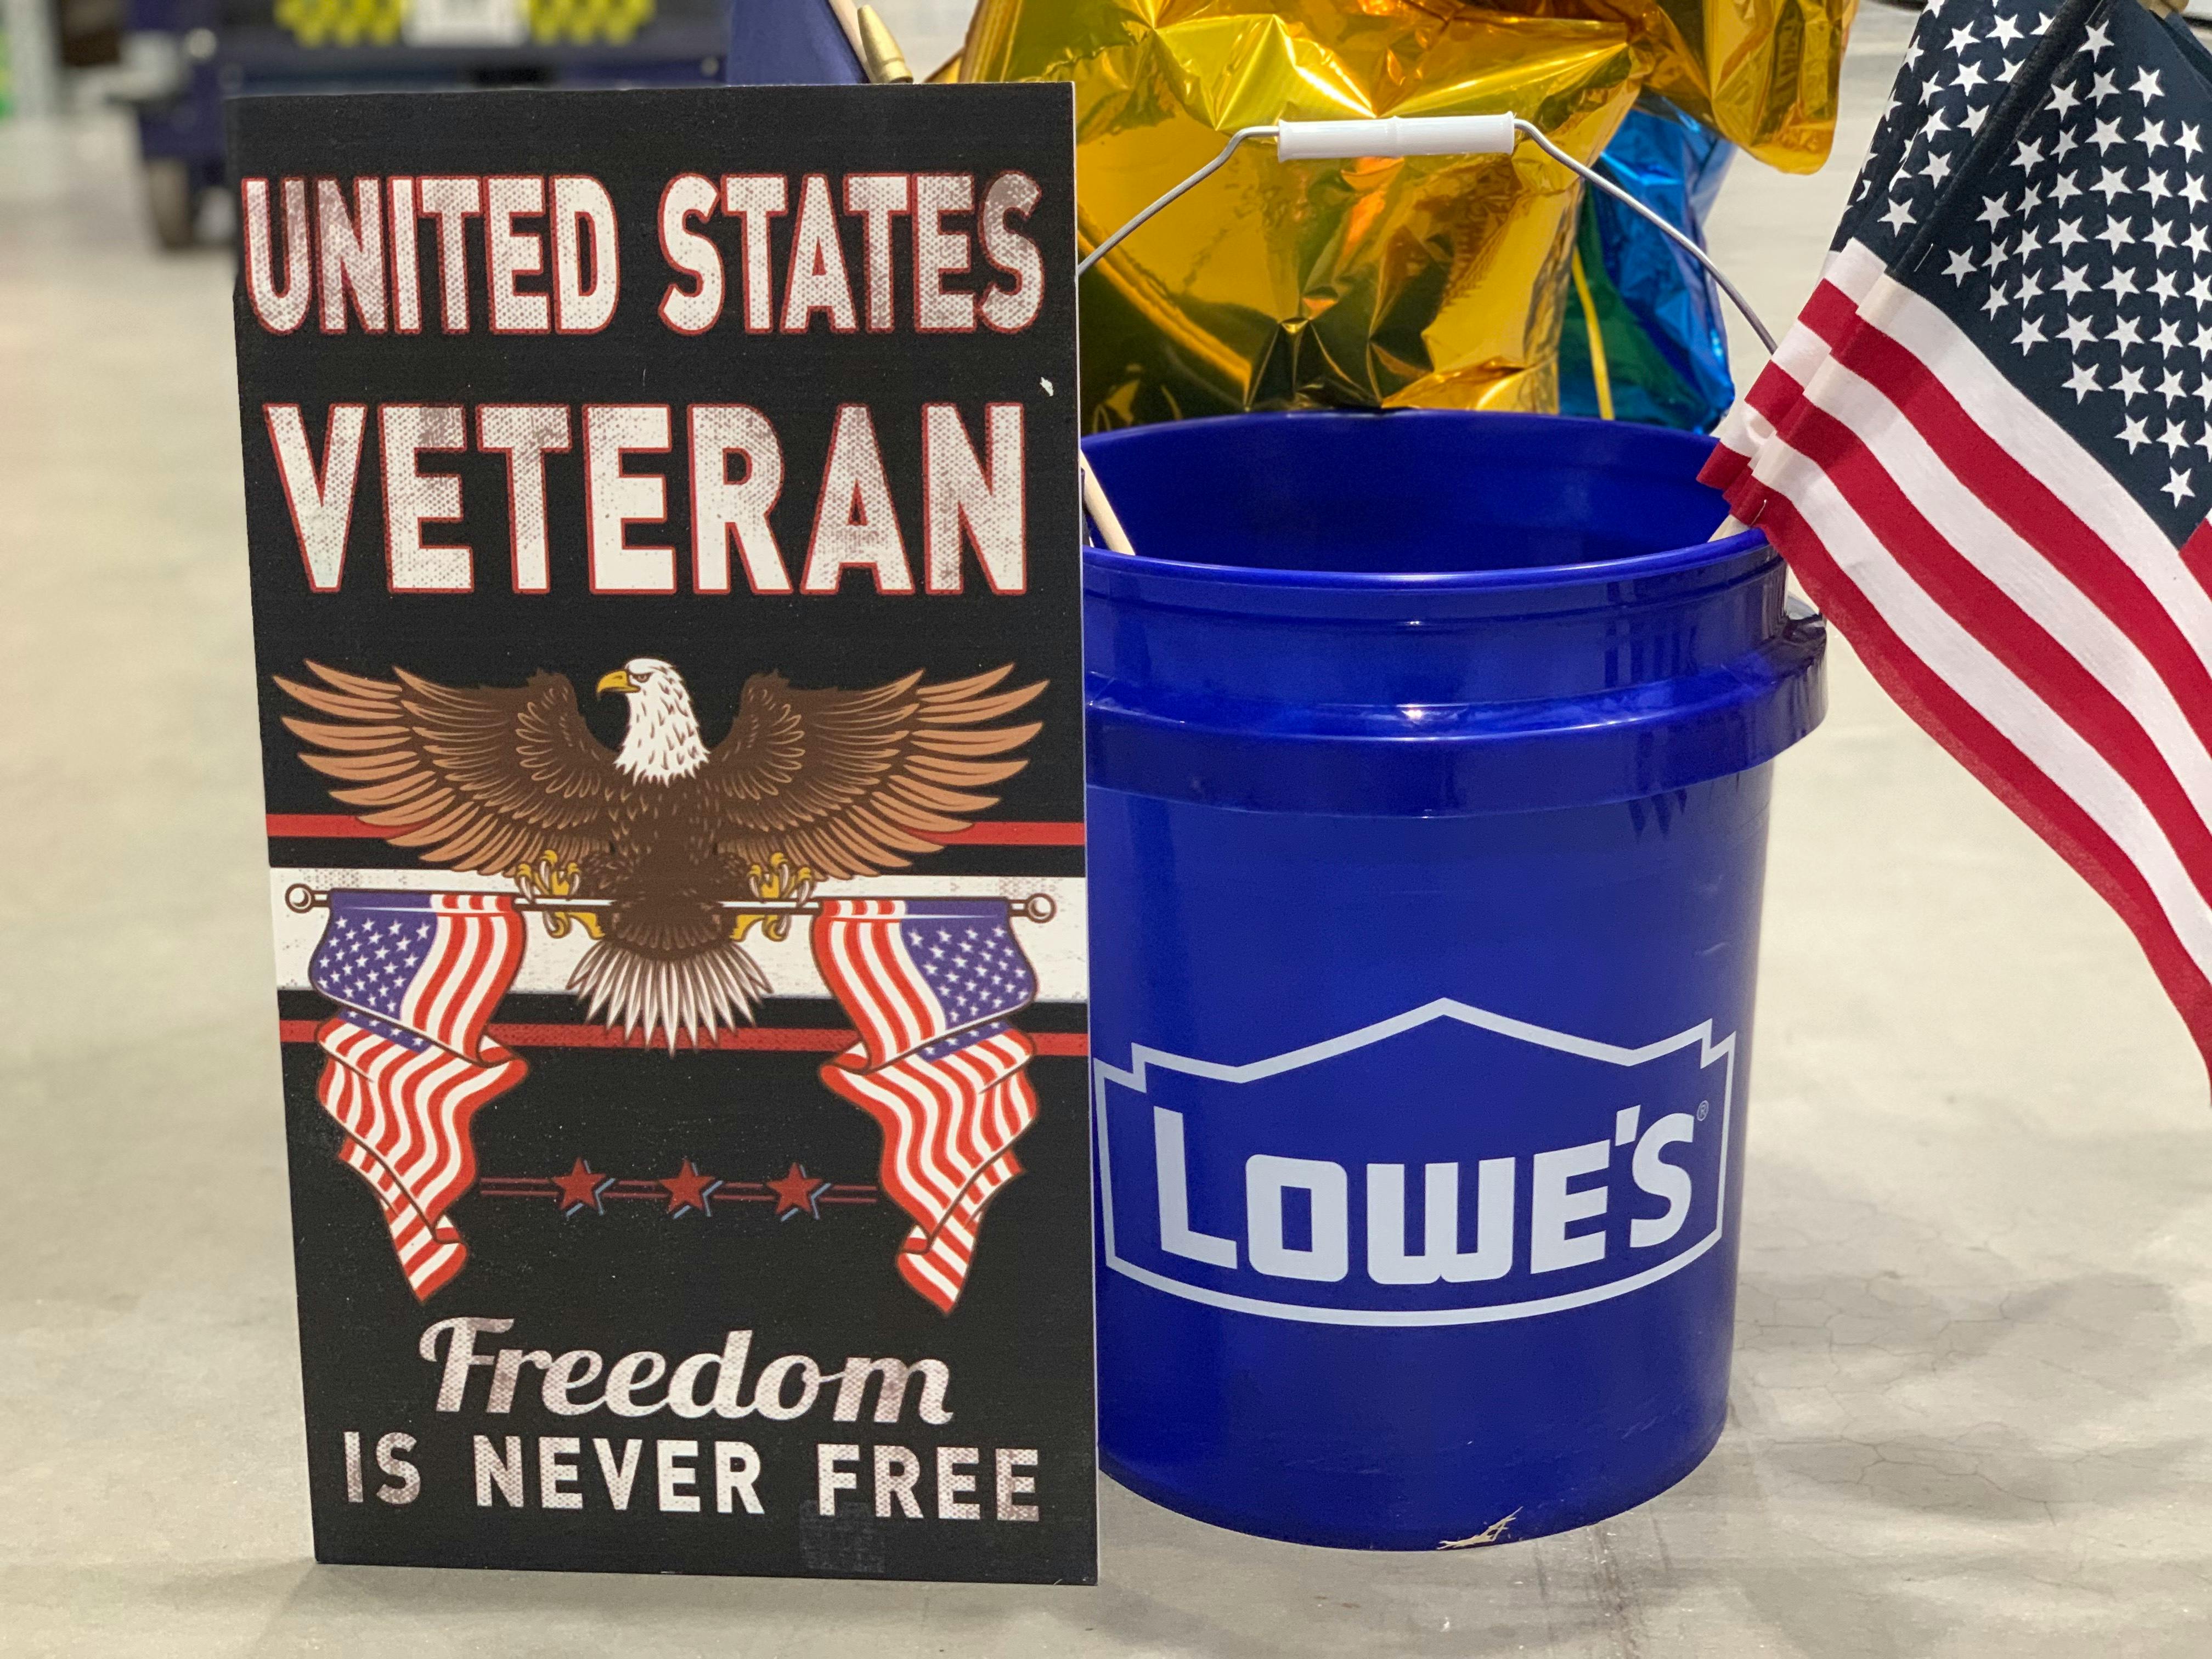 veteran sign with lowes bucket full of american flags